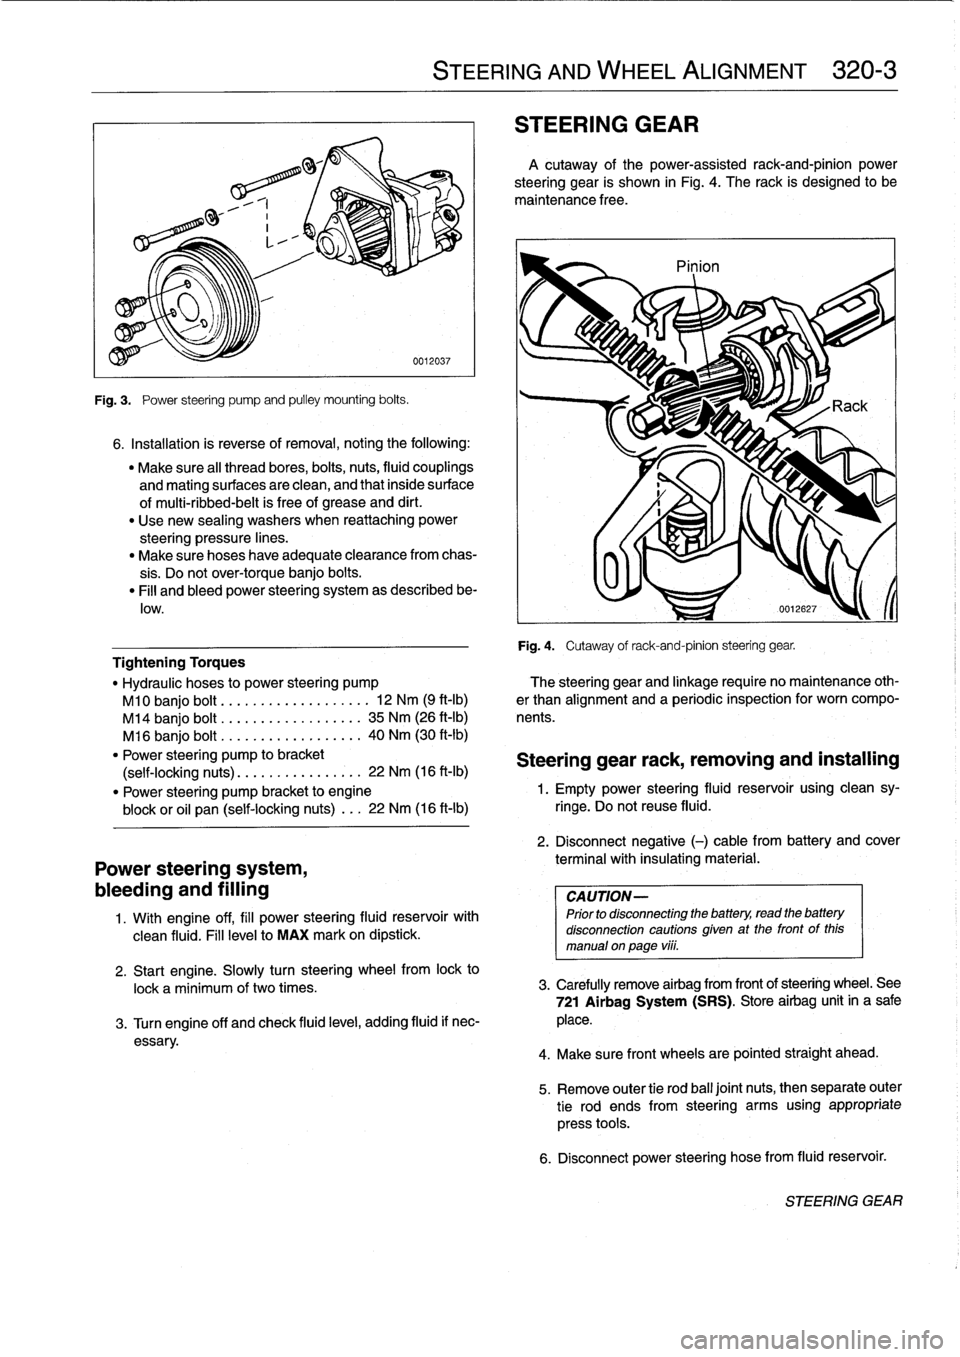 BMW M3 1993 E36 Workshop Manual 
Fig
.
3
.

	

Power
steering
pump
and
pulley
mounting
bolts
.

6
.
Installation
is
reverse
of
removal,
noting
the
following
:

"
Make
sure
al¡
thread
bores,
bolts,
nuts,
fluid
couplings

and
mating
